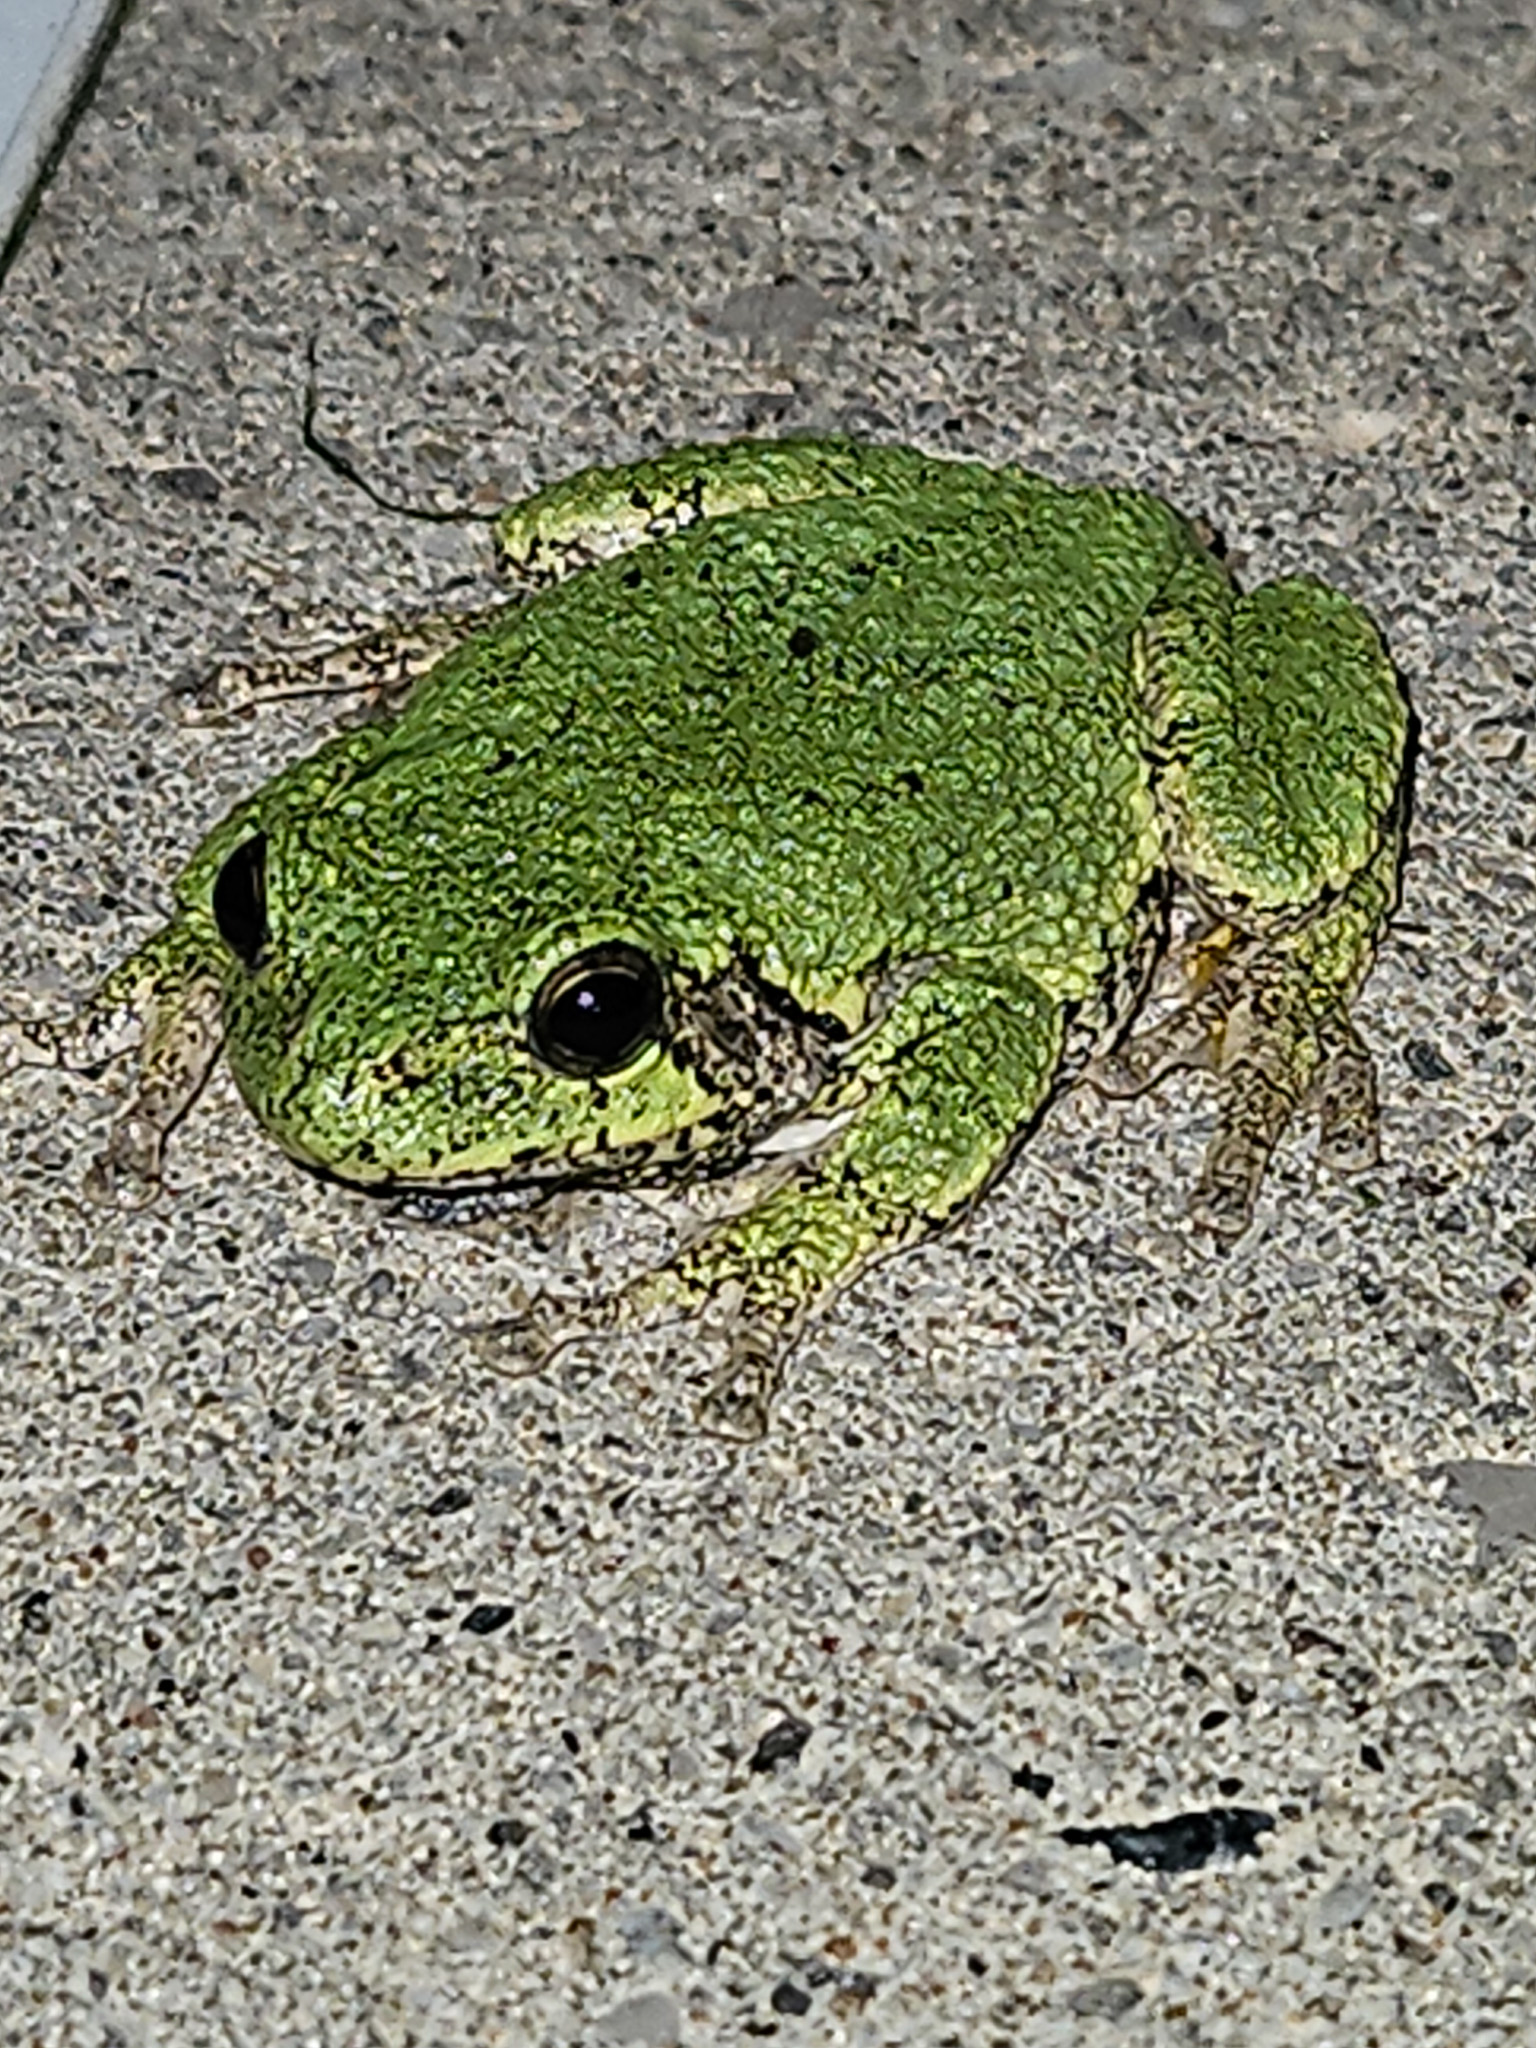 Is it a Spring peeper or a toad?